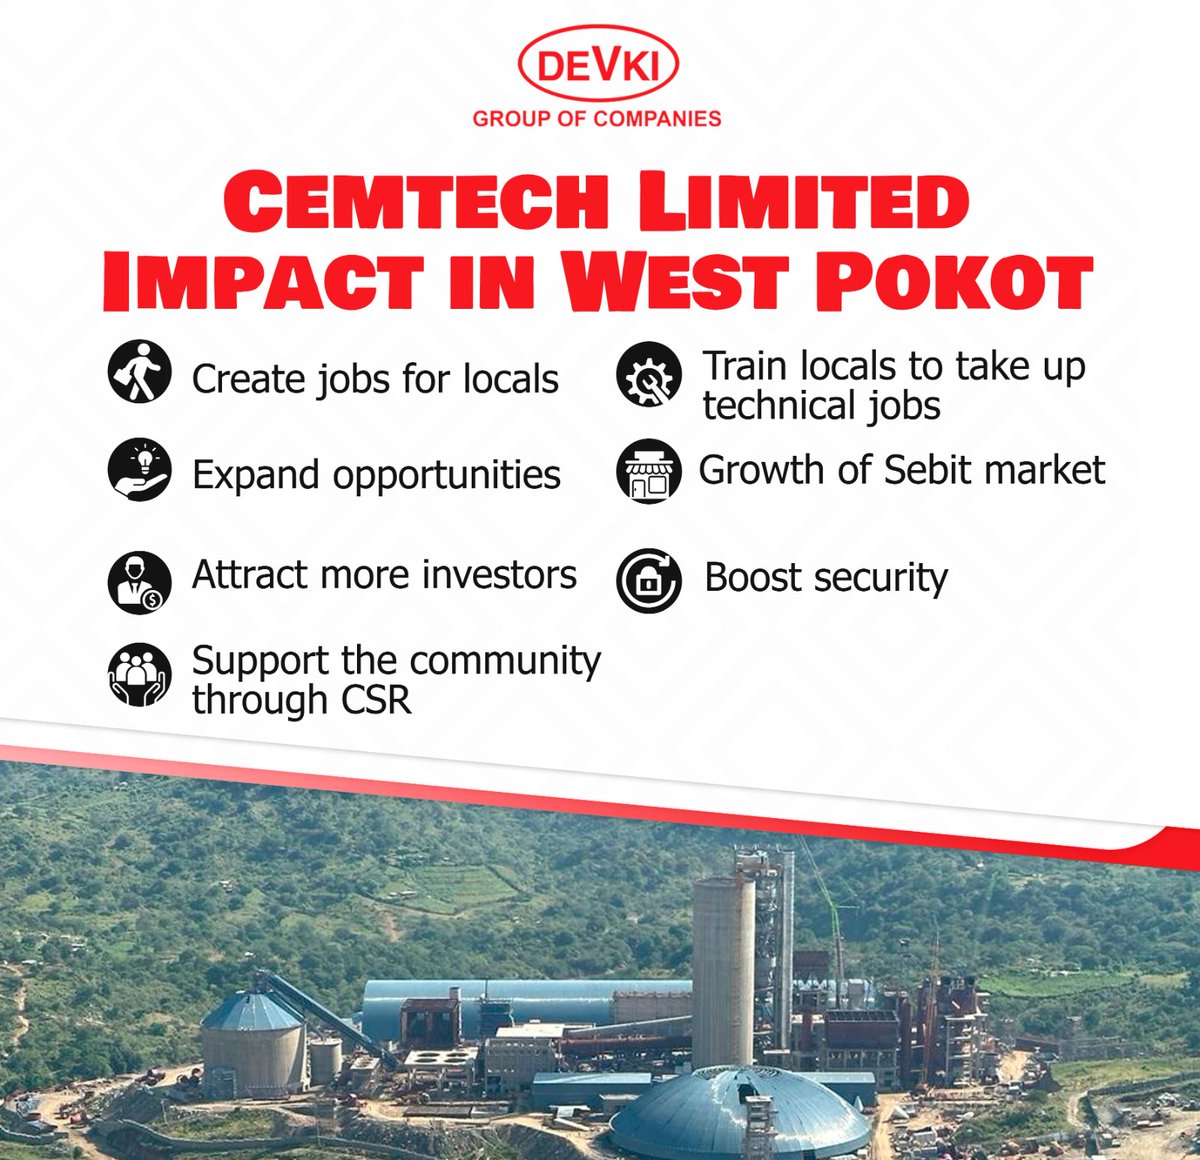 The success story of the CEMTECH Plant in West Pokot serves as a model for other regions, demonstrating the potential of publicprivate partnerships, visionary leadership, and strategic investments in driving inclusive and sustainable development.
Devki Empowers
#CemtechLaunch